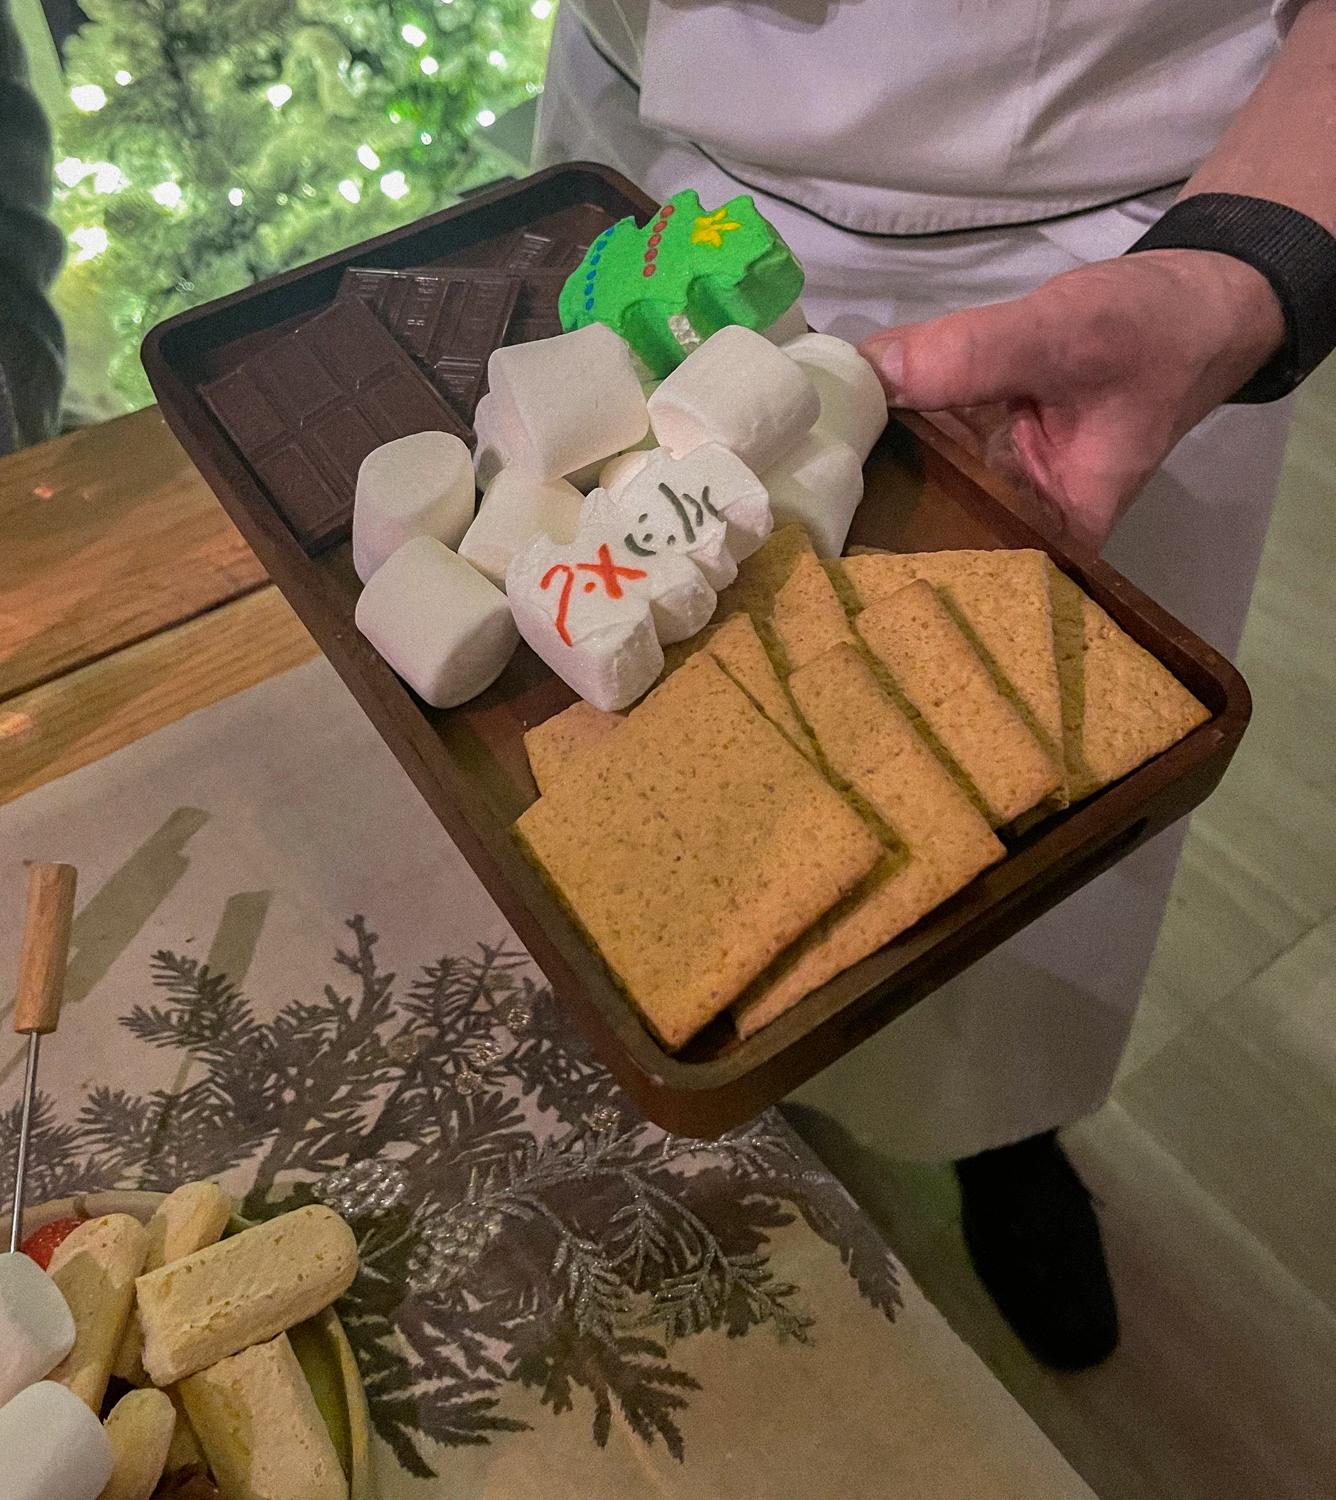 A Winter dream in the middle of Los Angeles – festive s'mores kit